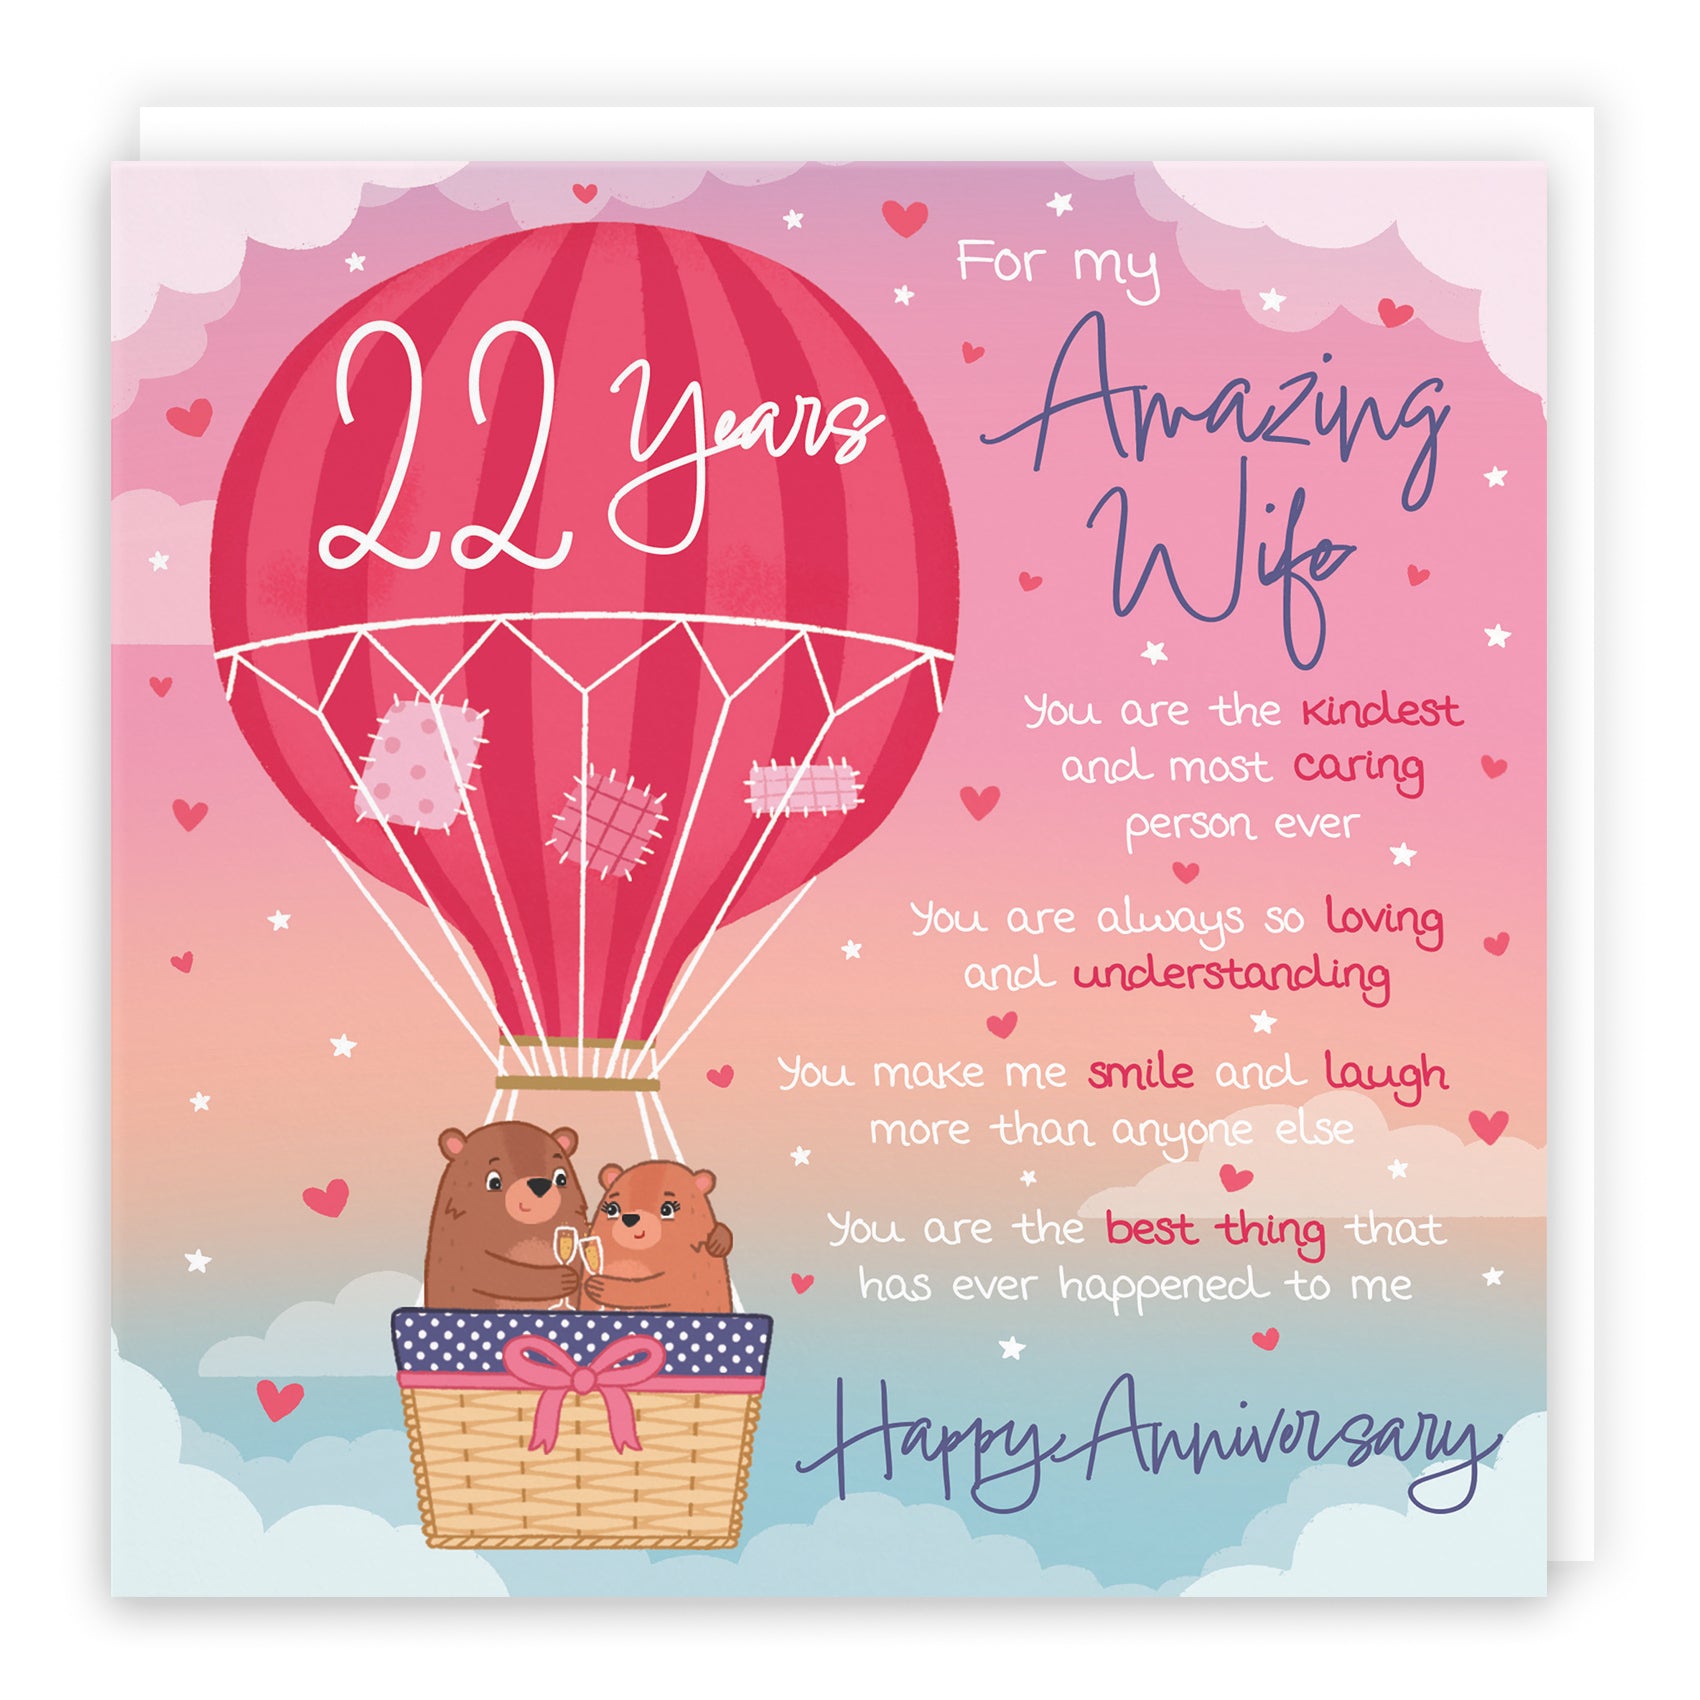 Wife 22nd Anniversary Poem Card Love Is In The Air Cute Bears